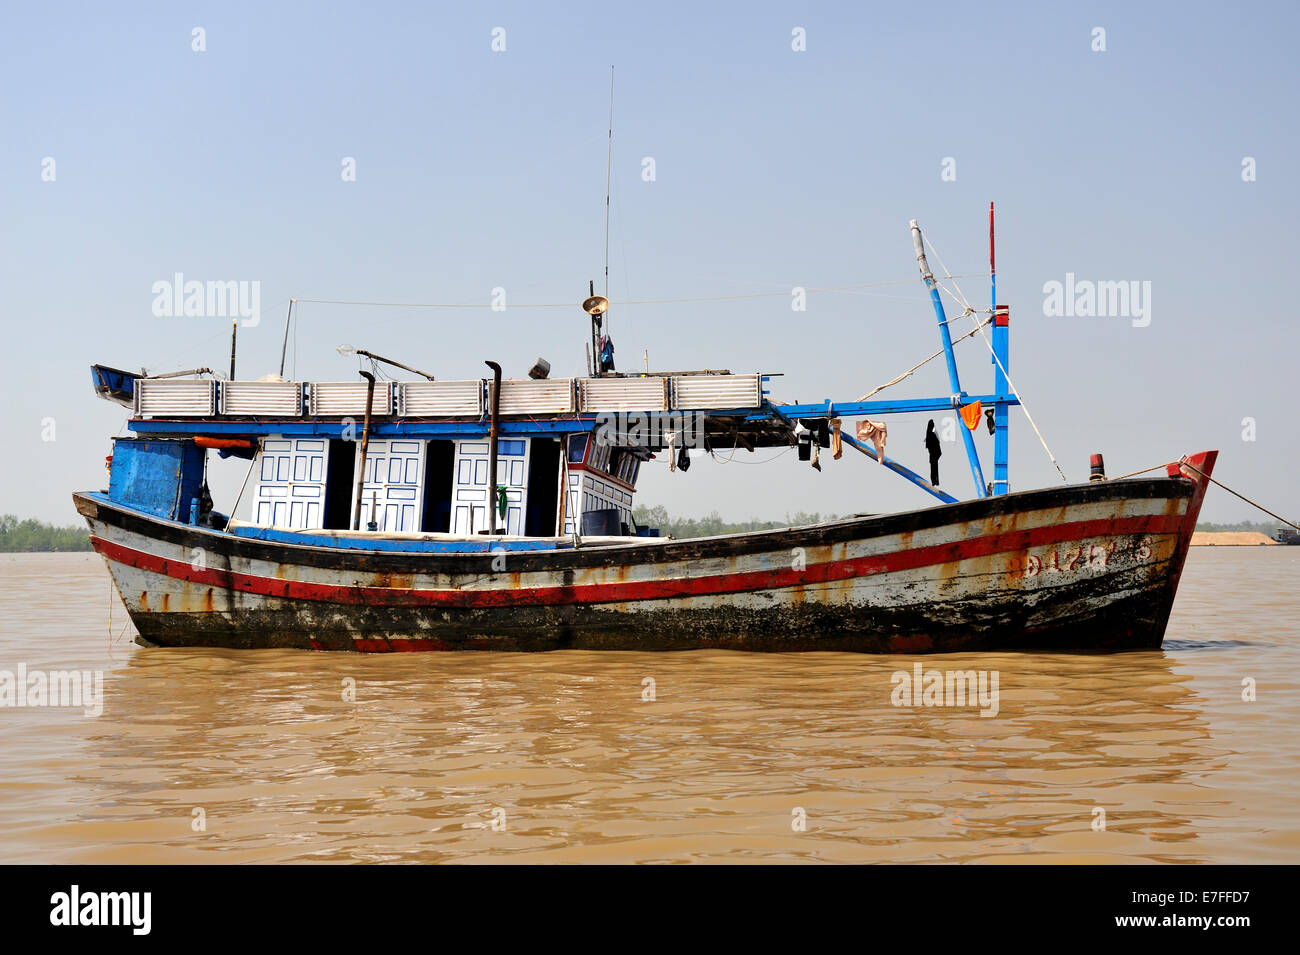 Wooden hulled boat on the Mekong River, Ben Tre province, Vietnam Stock Photo